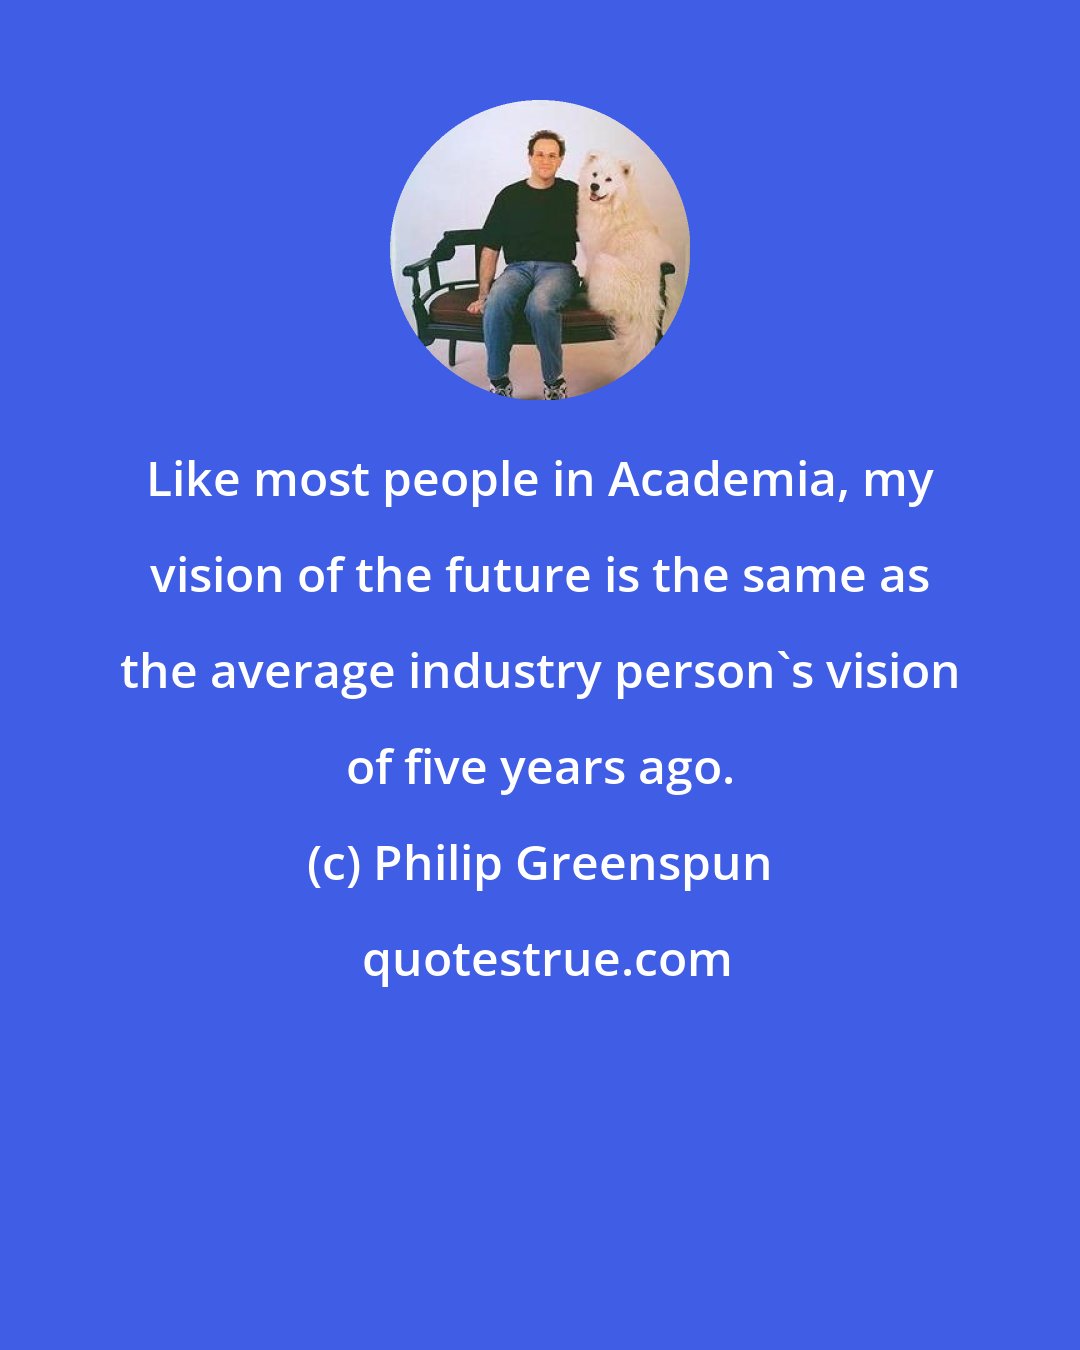 Philip Greenspun: Like most people in Academia, my vision of the future is the same as the average industry person's vision of five years ago.